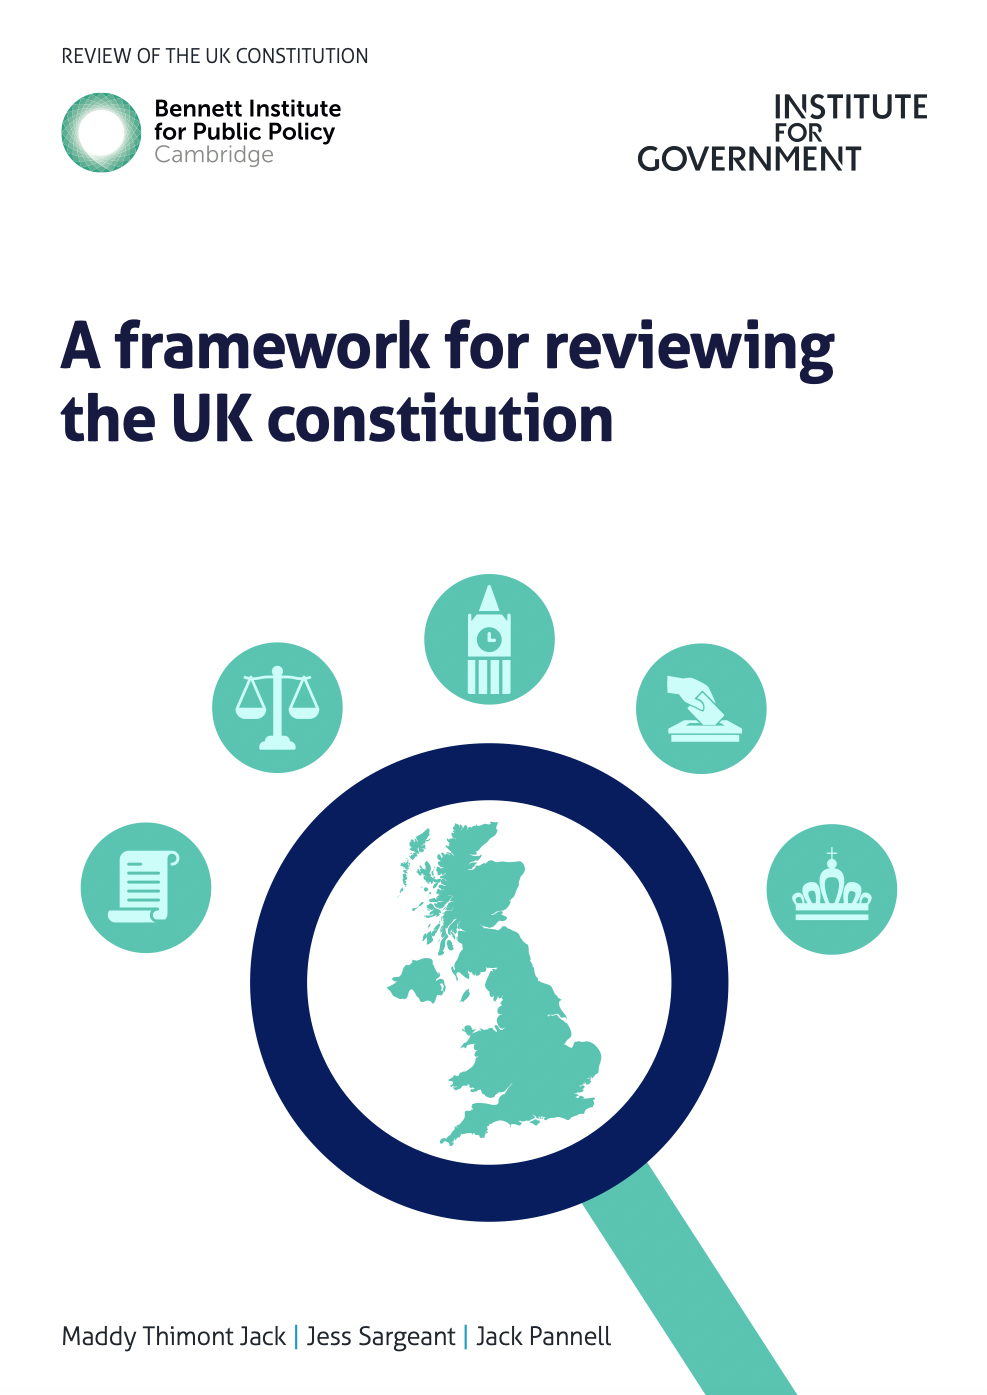 A framework for reviewing the UK constitution